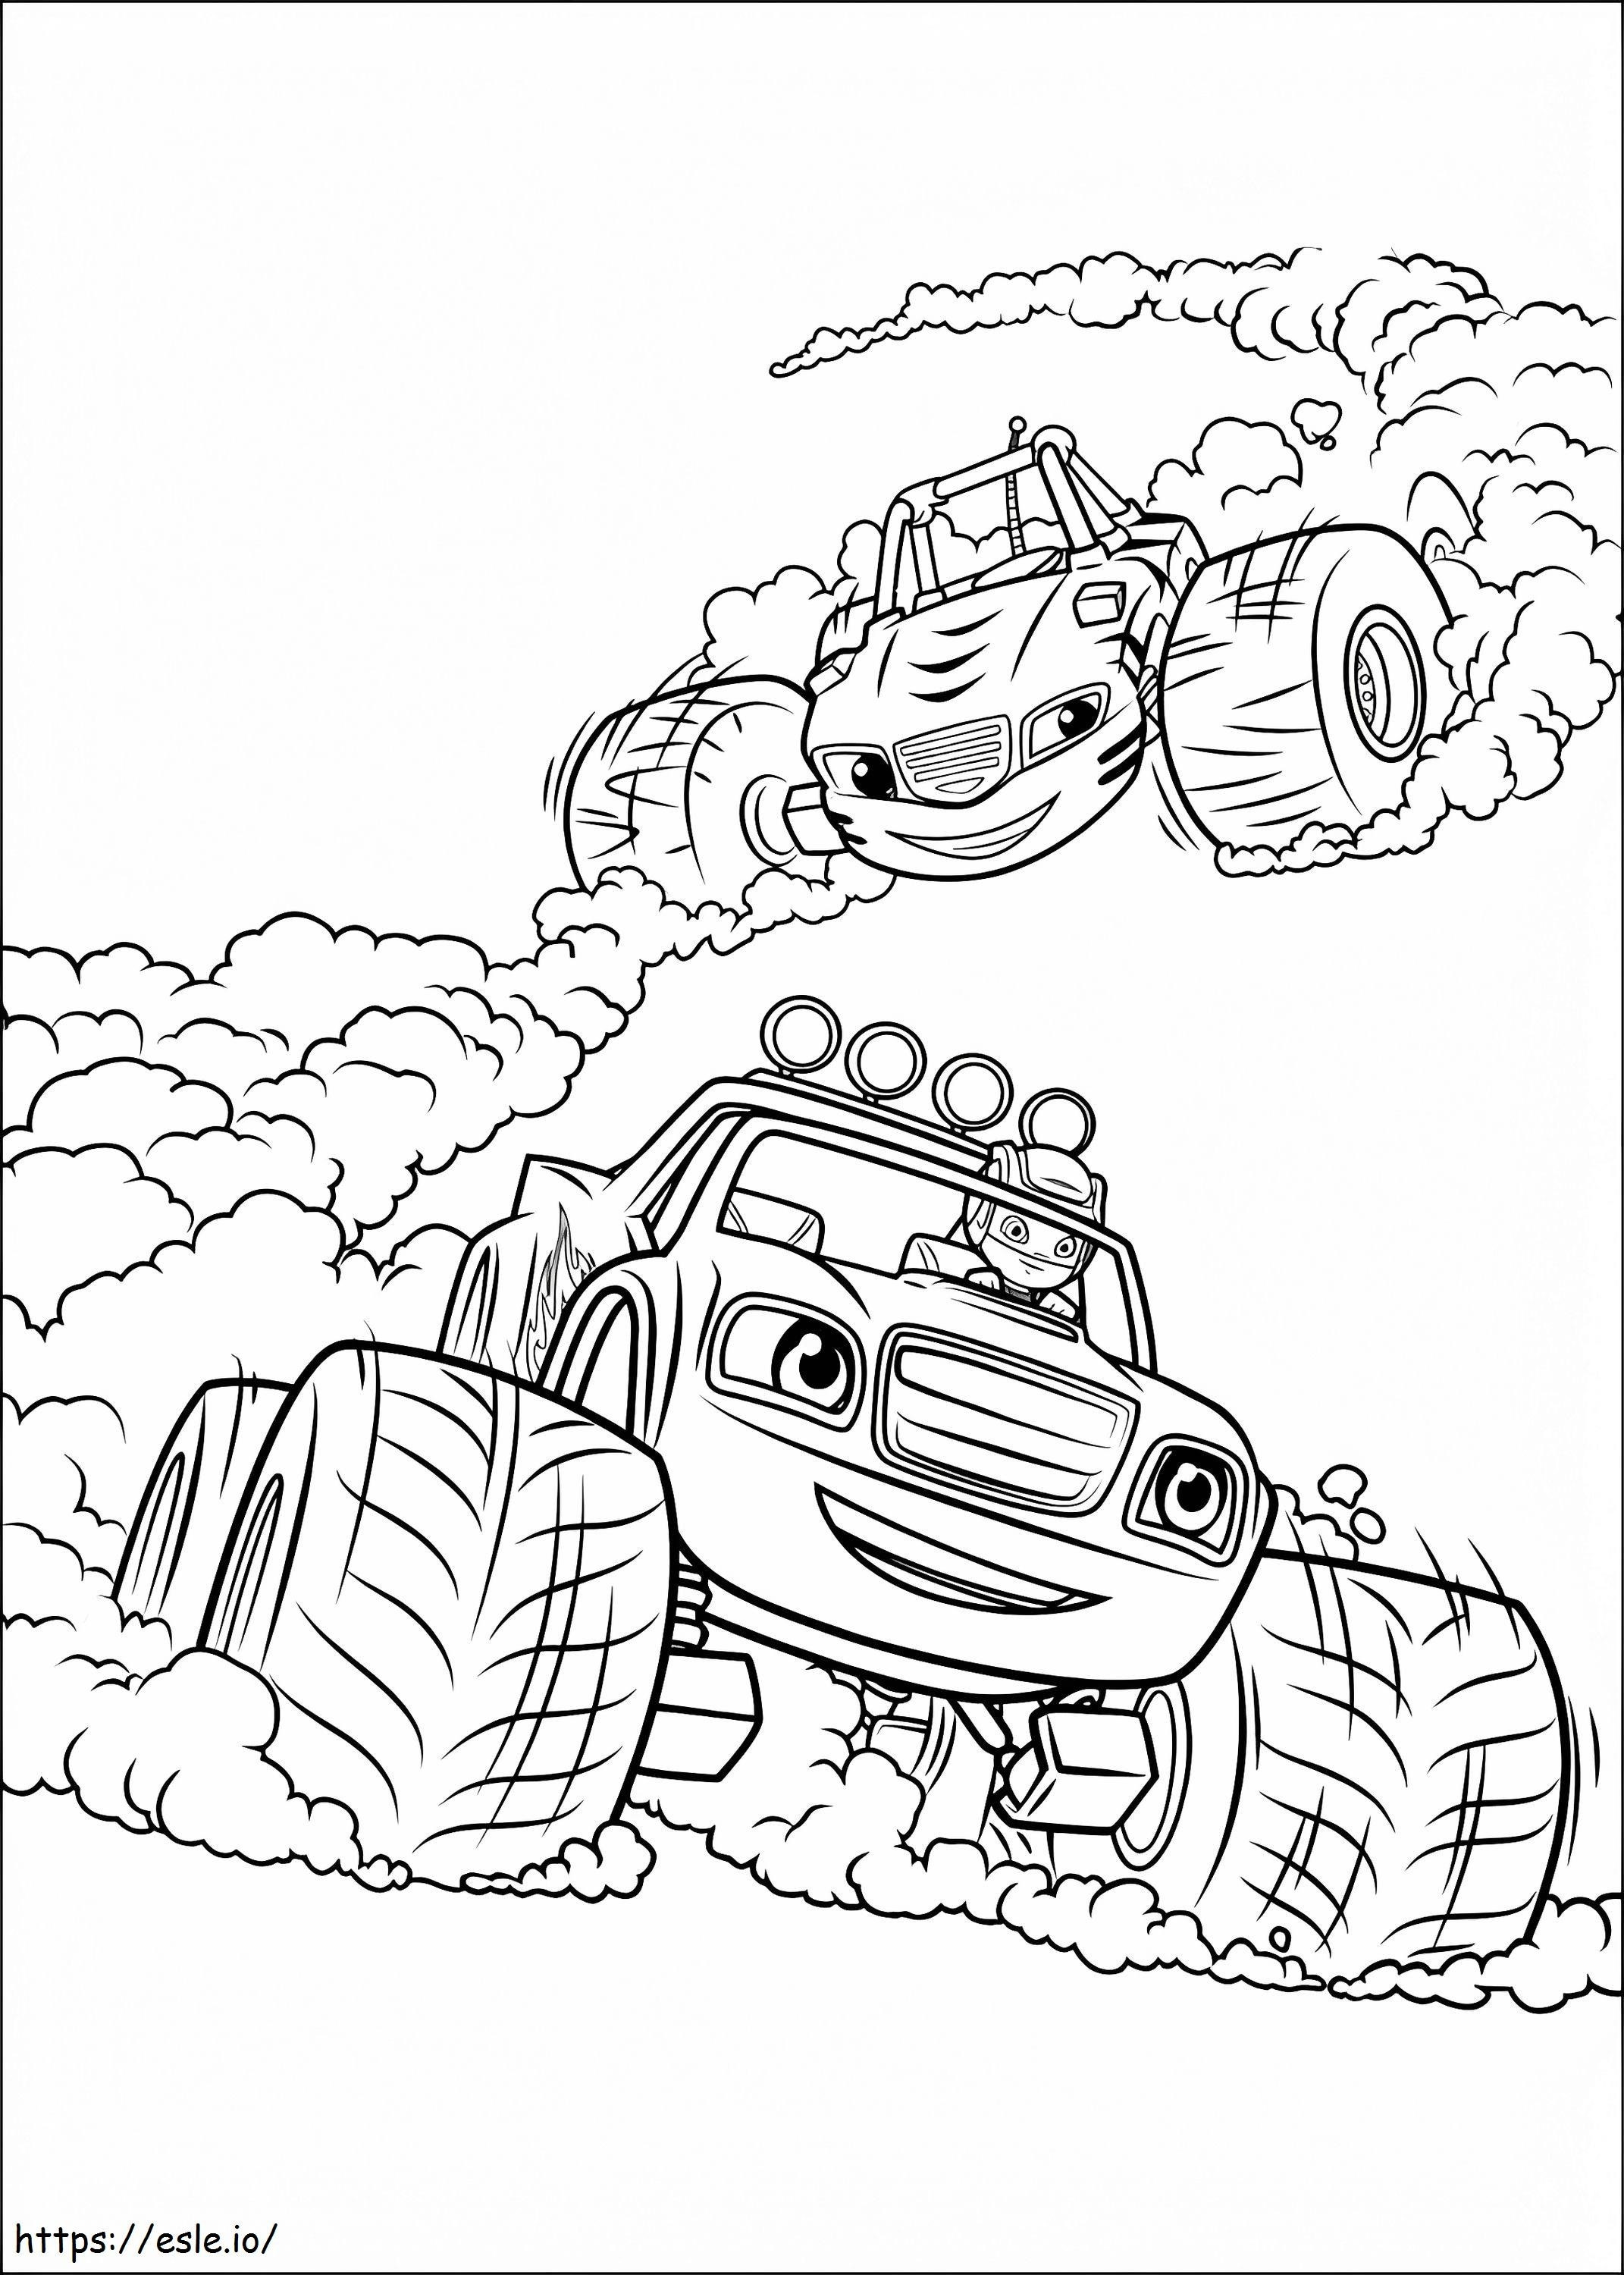 1533872740 Stripes And Blaze Racing A4 coloring page